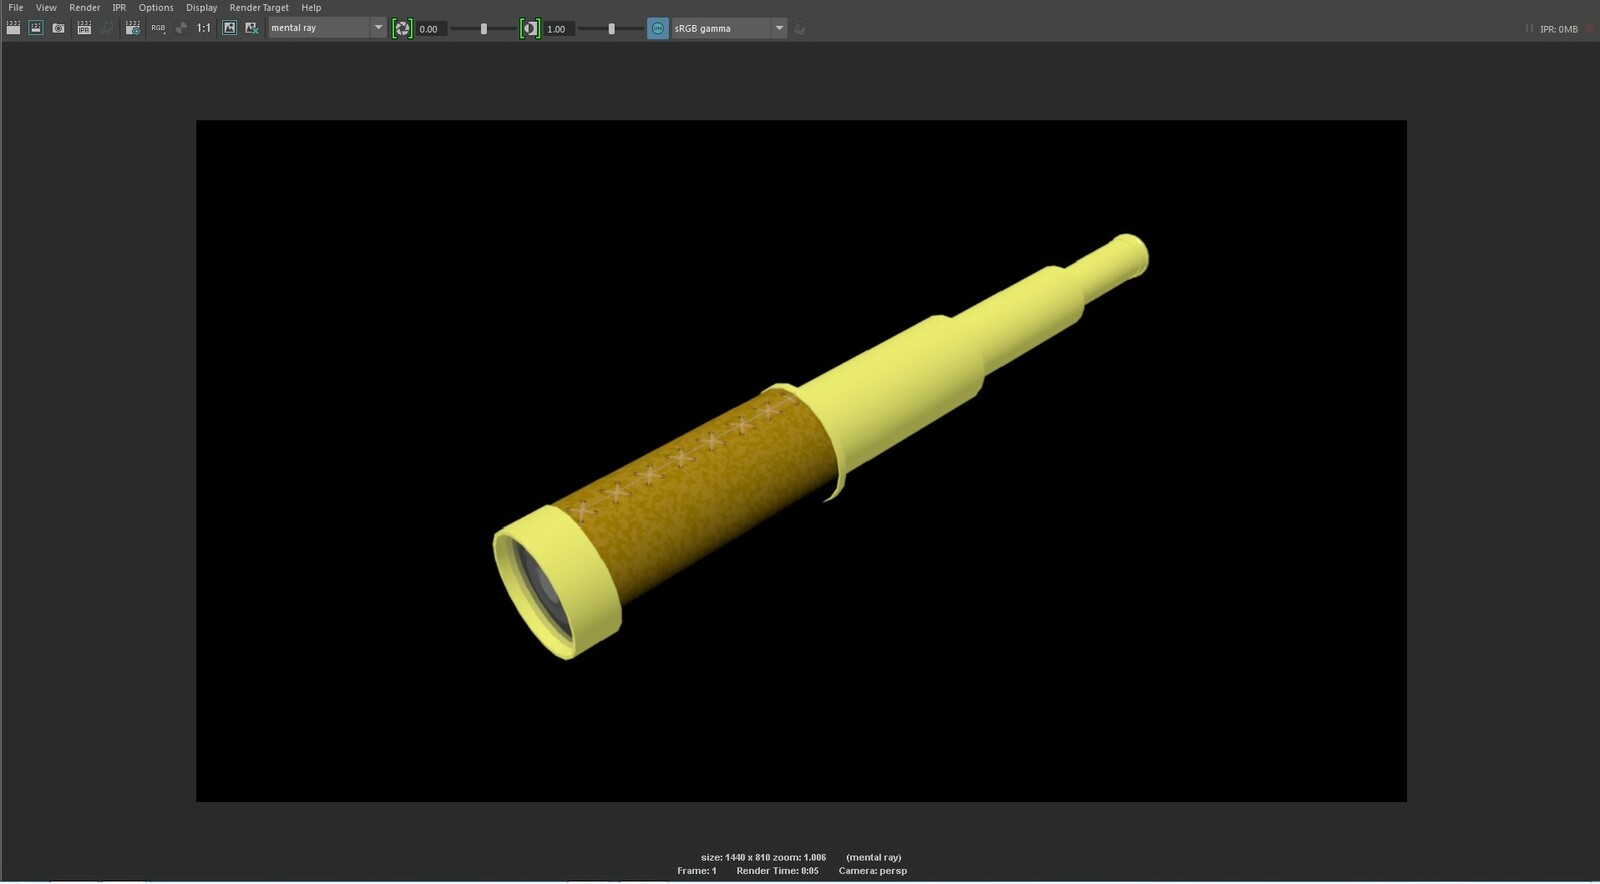 The final 3D model of the navy spyglass